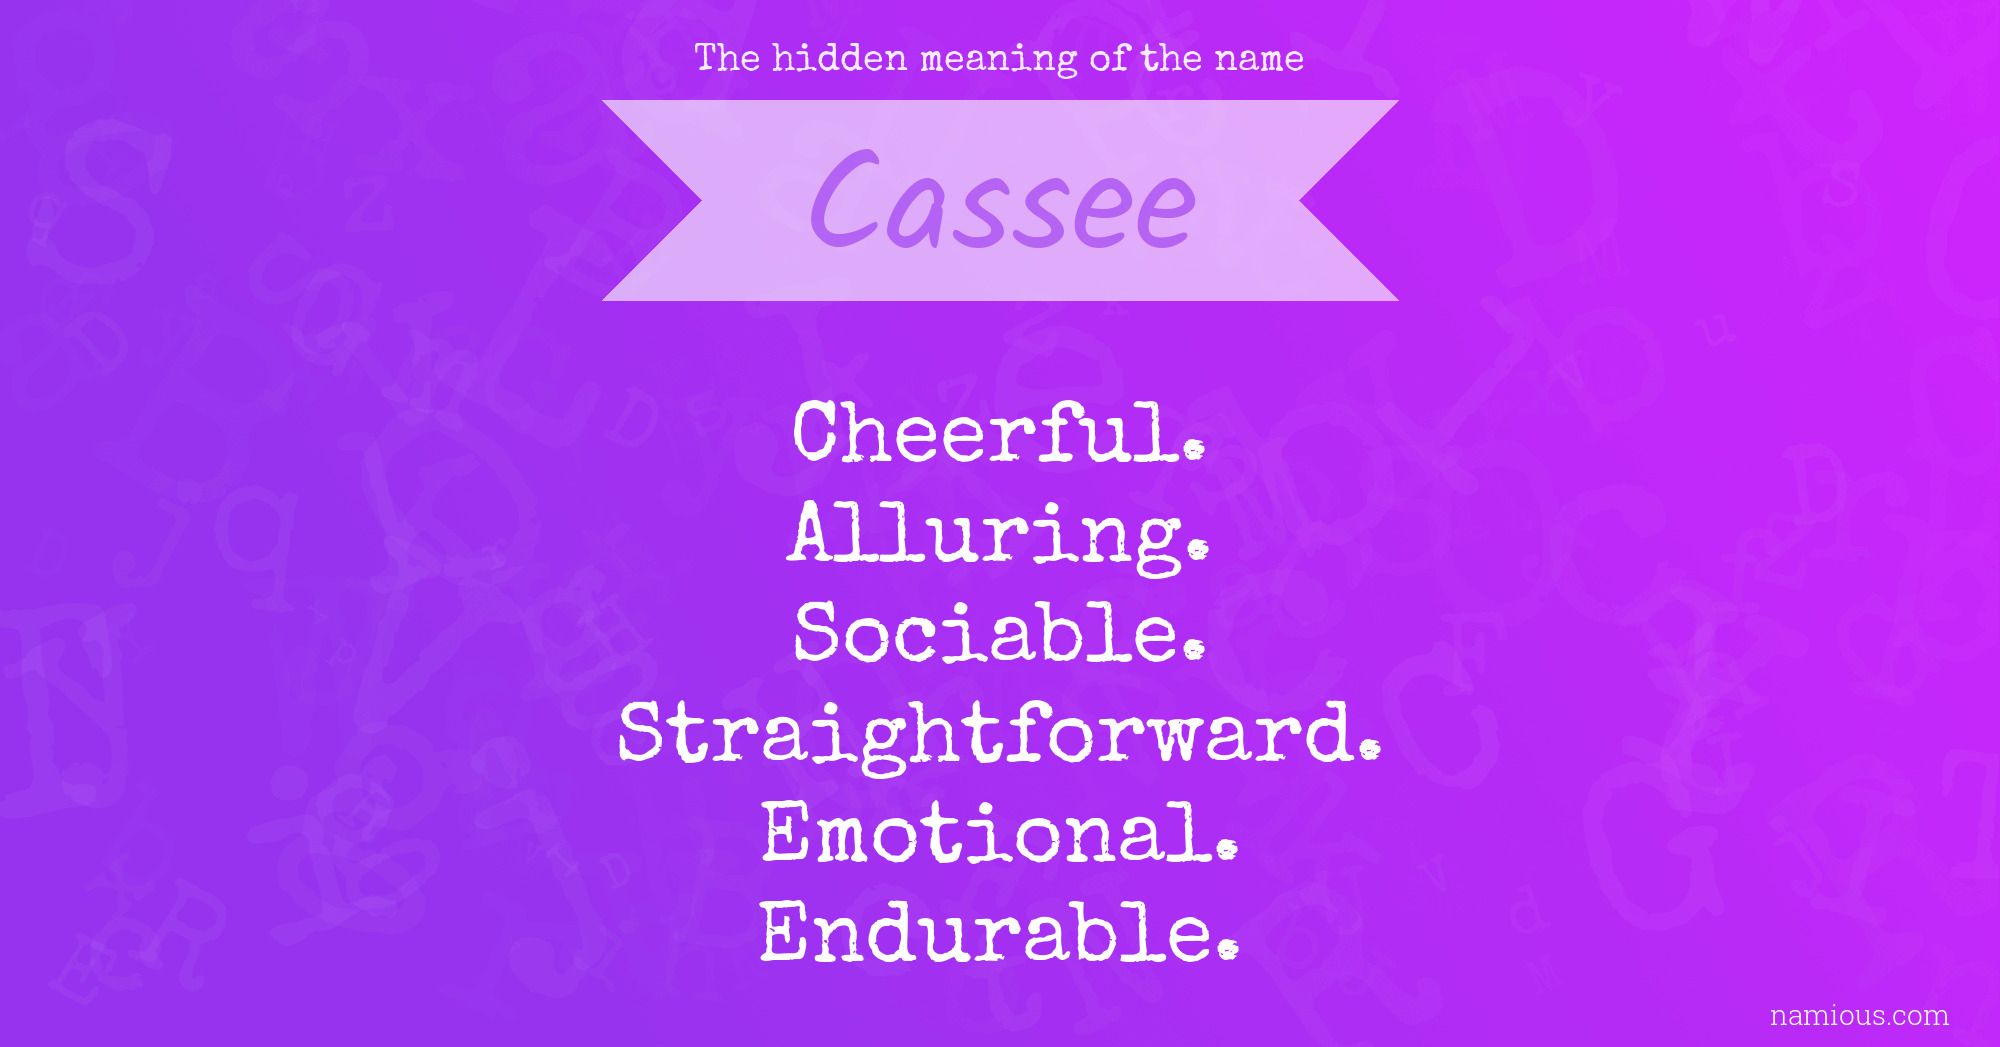 The hidden meaning of the name Cassee